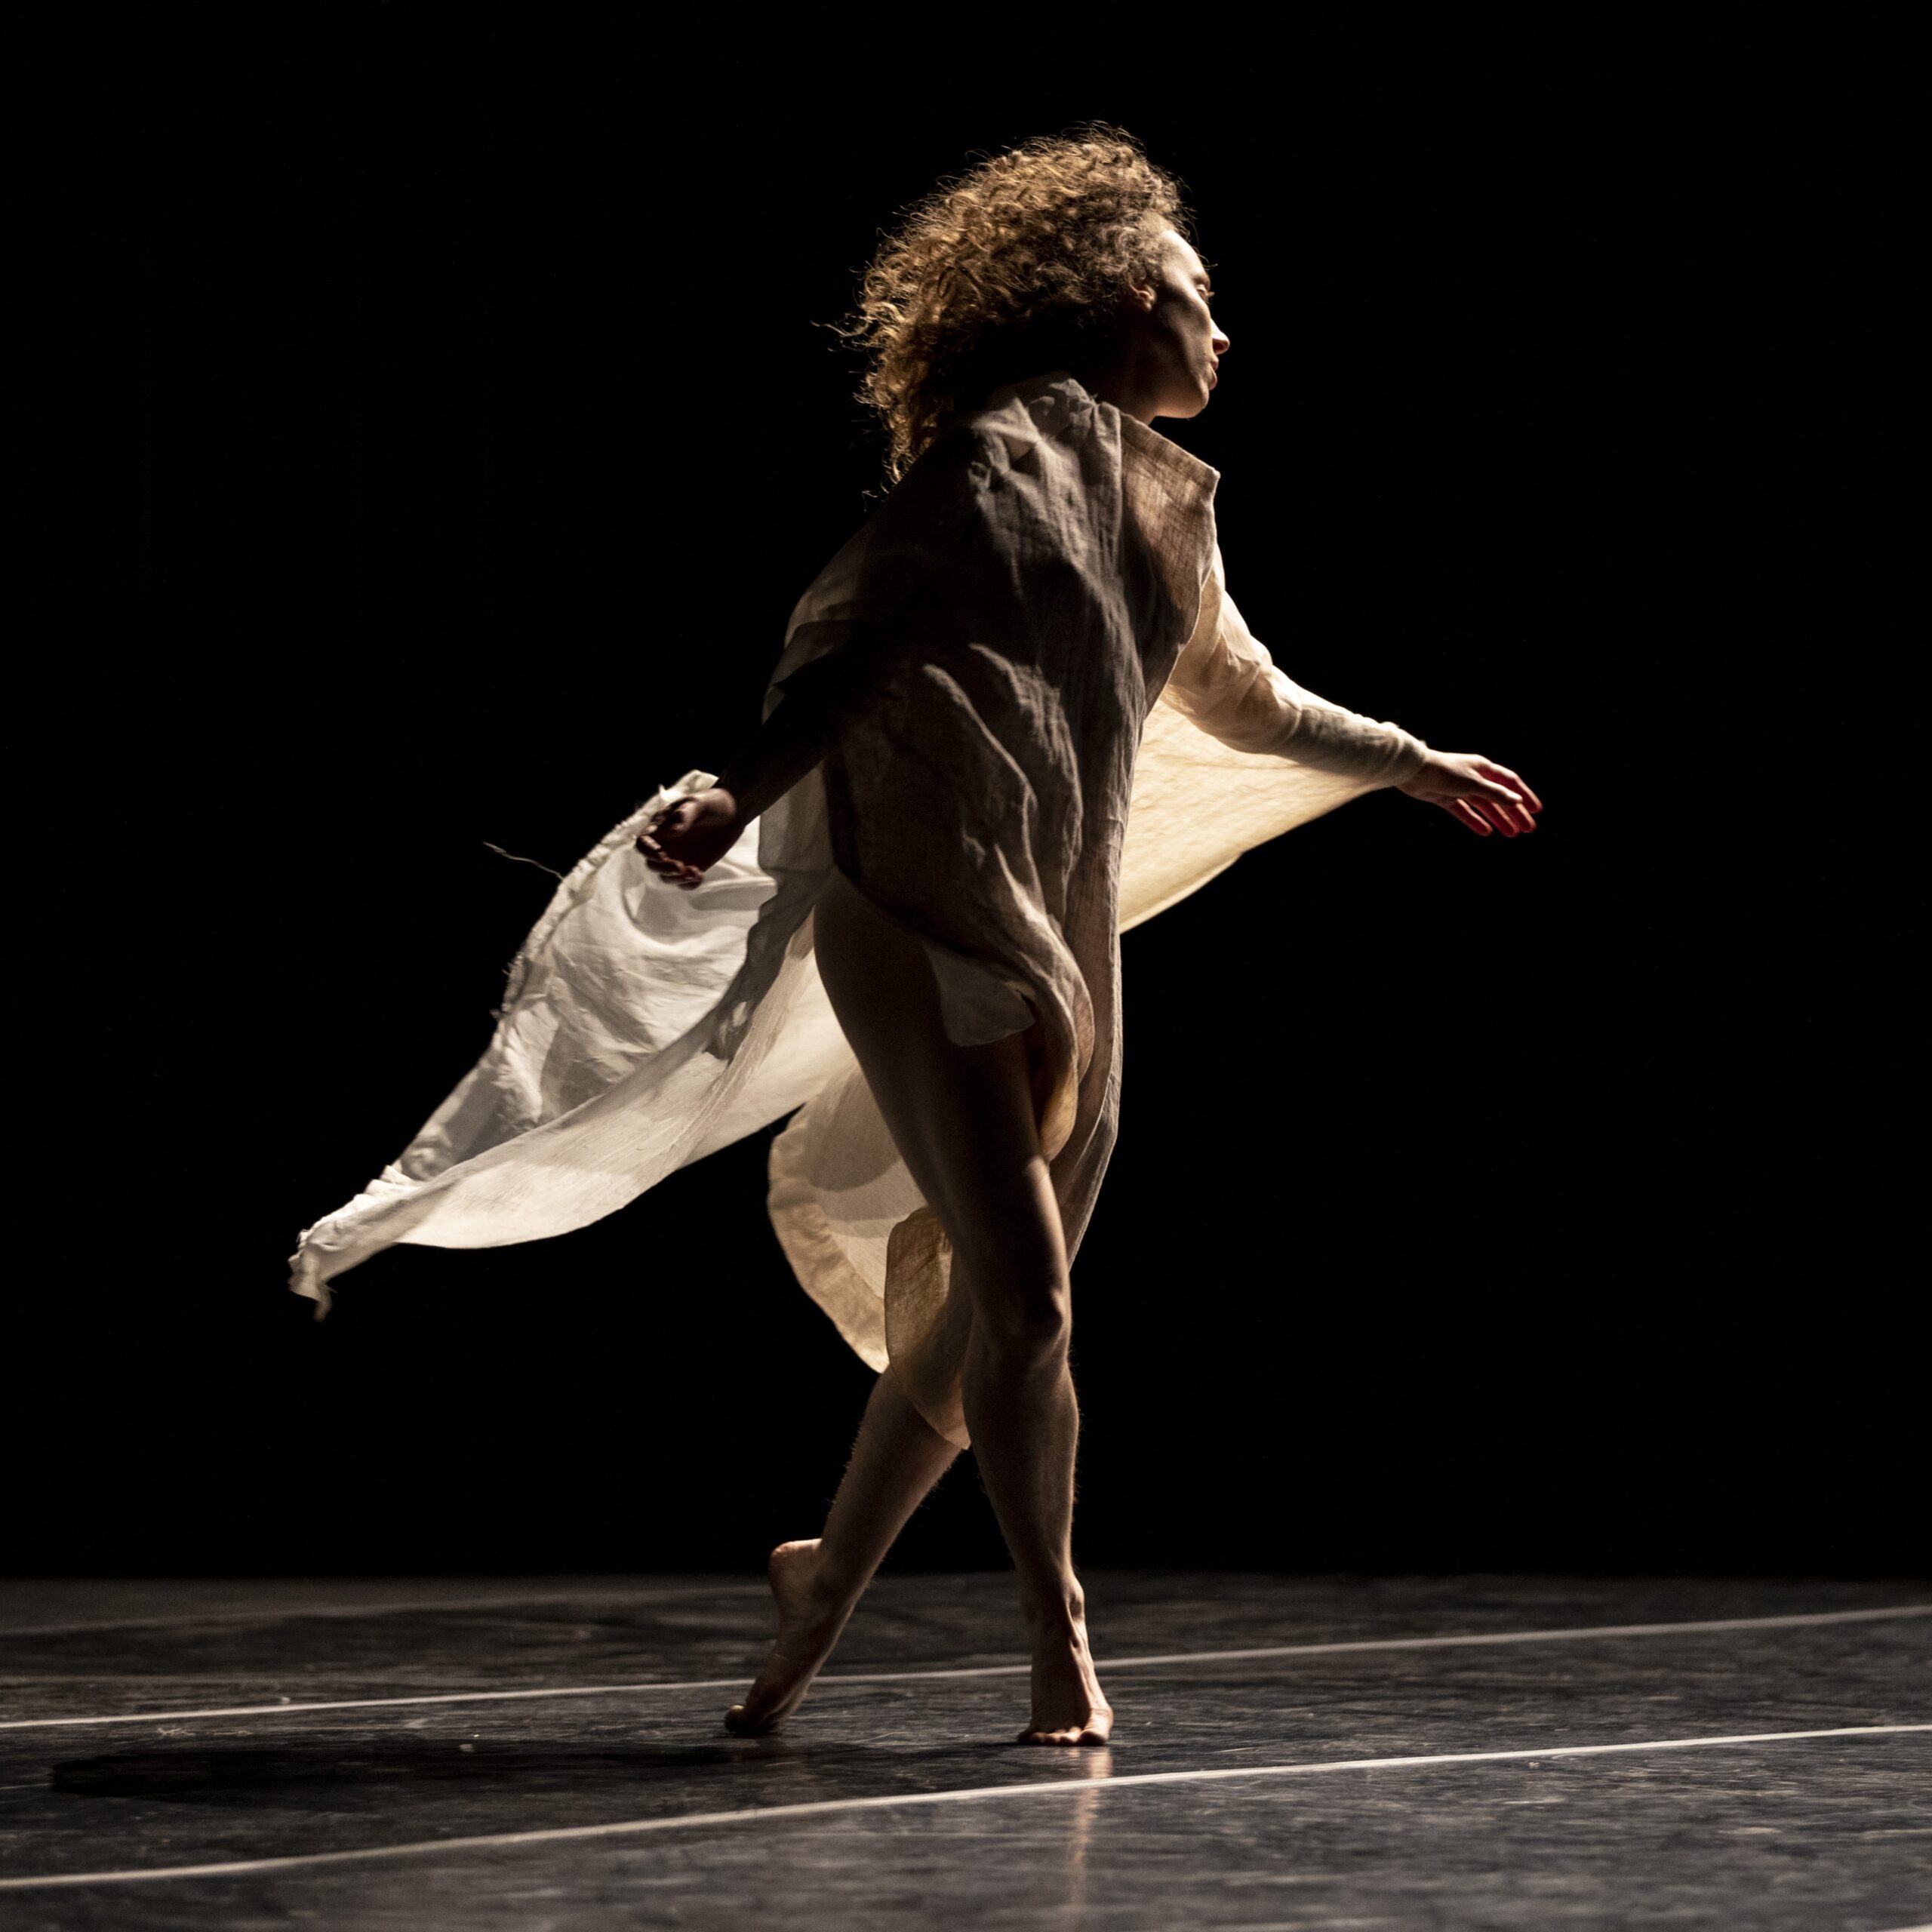 One dancer with long and curly hair wearing long flowy beige costume makes a step on stage.